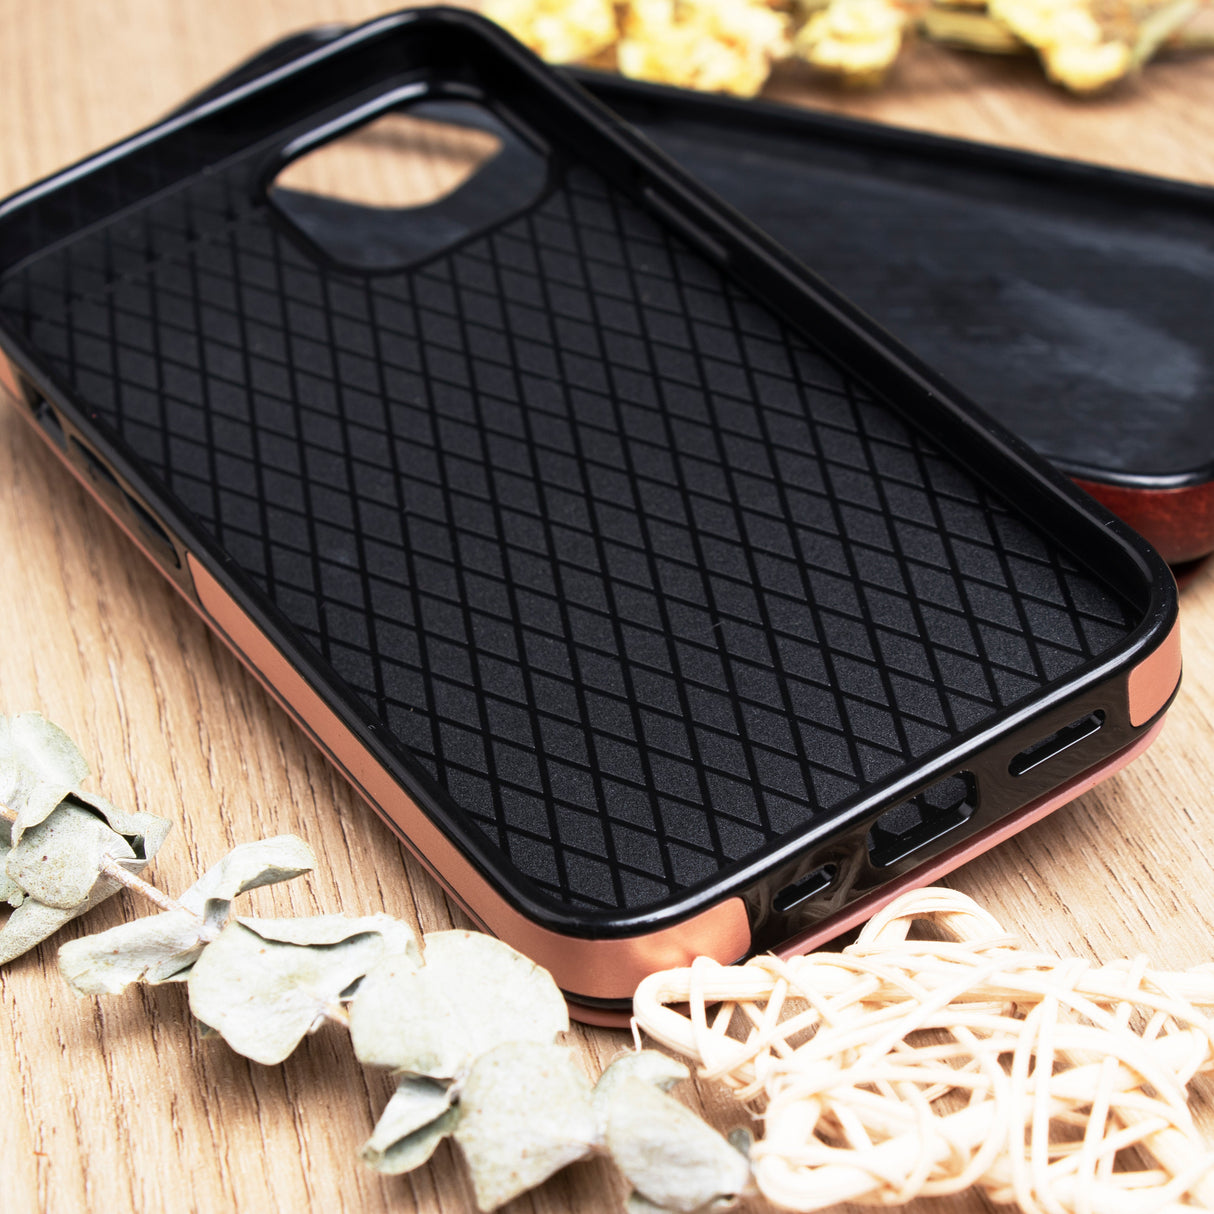 Gex Personalized Engraved Leather Phone Cases for iPhone - GexWorldwide